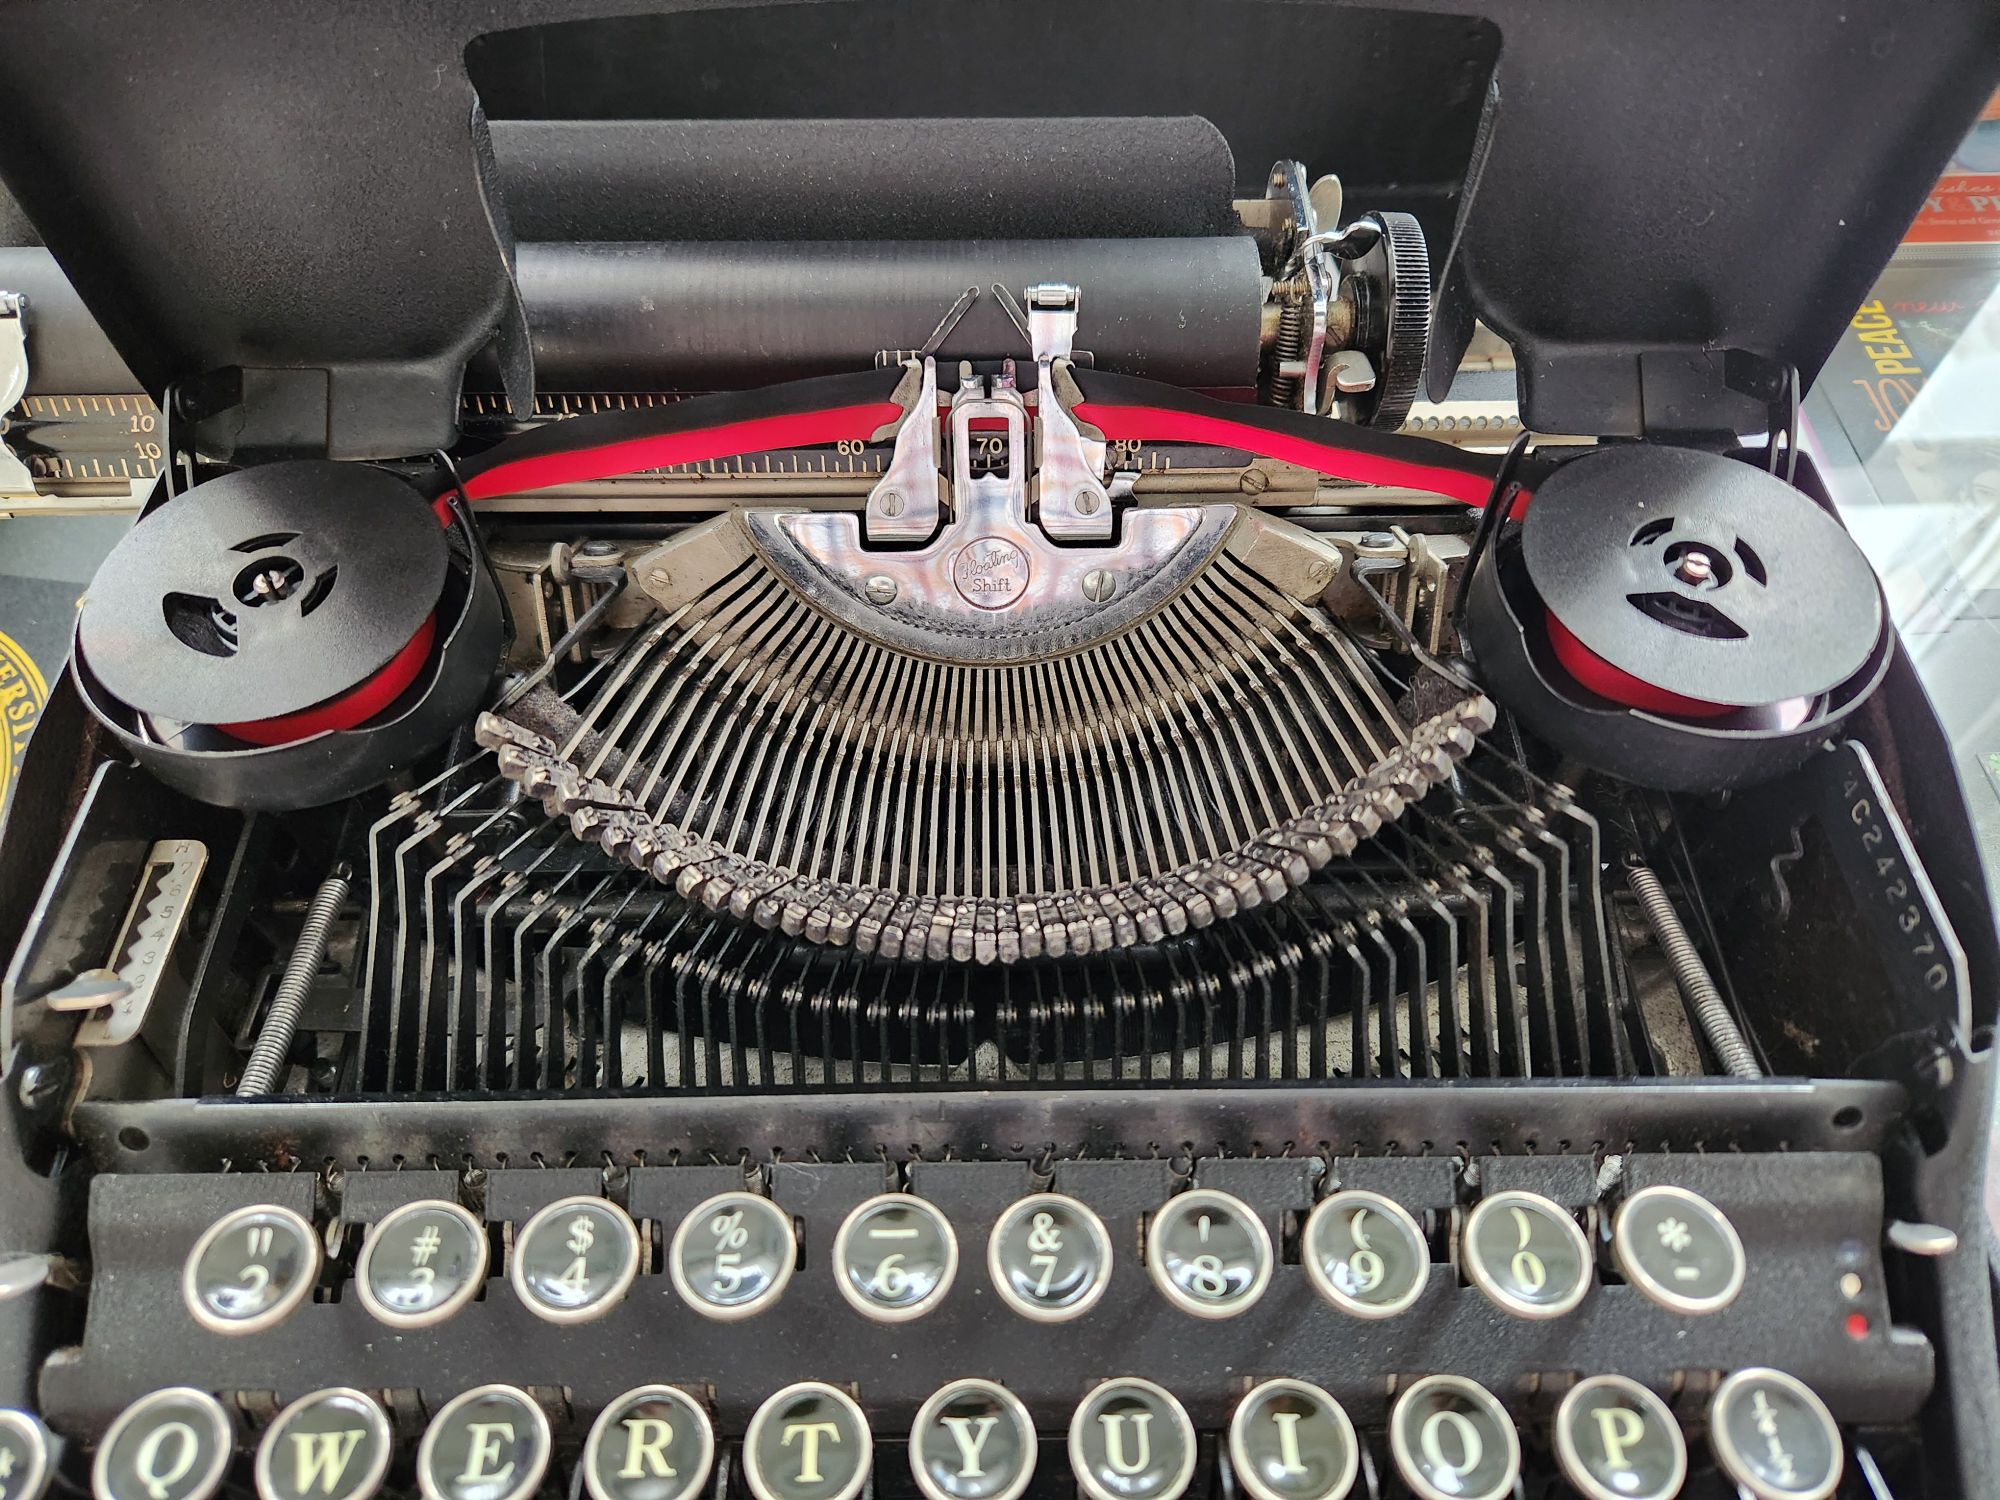 Two spools of black and red bichrome typewriter ribbon threaded into a Smith-Corona. In the foreground is the typebasket and two rows of glass keys.